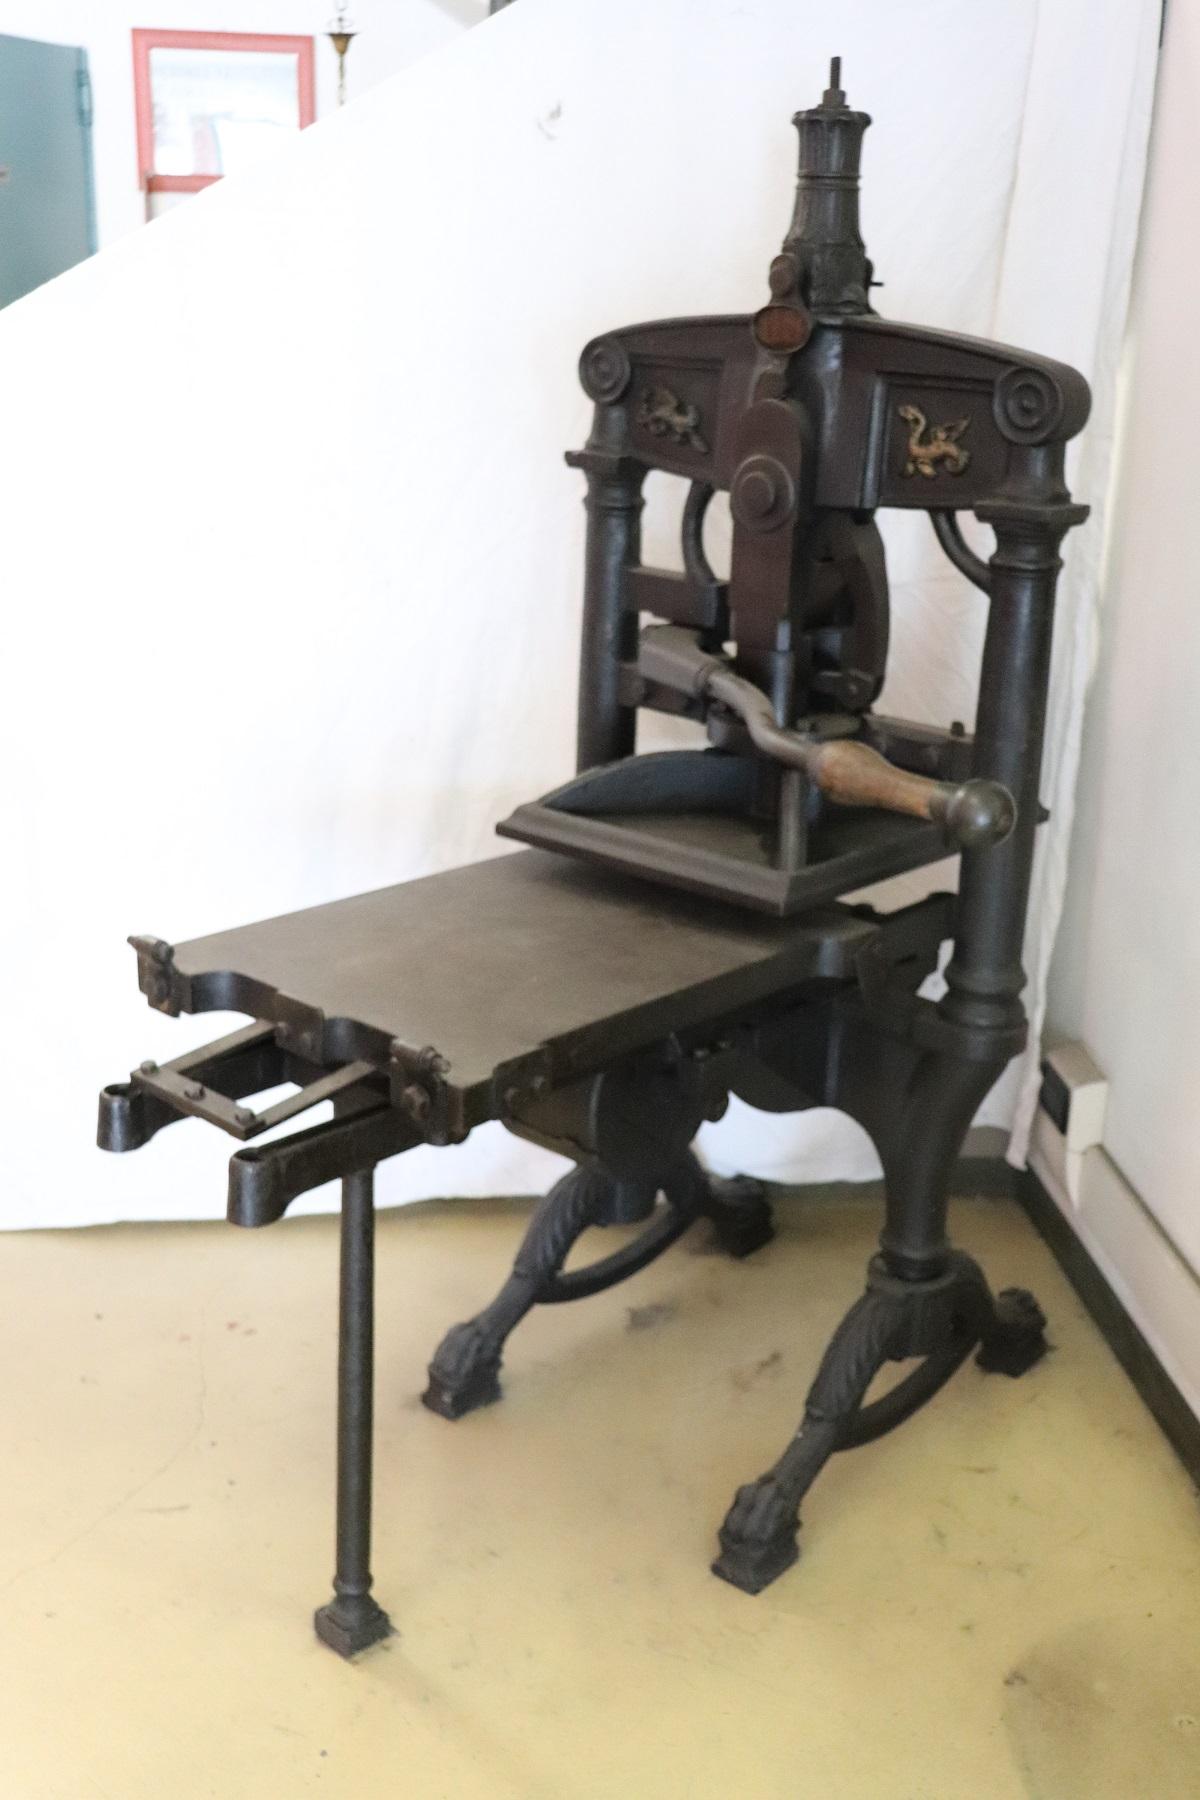 This rare item for sale is part of the history of typography. A beautiful example of a 19th century book press made entirely of iron. The iron is forged with decorative elements these characteristics were intended only for presses in use by